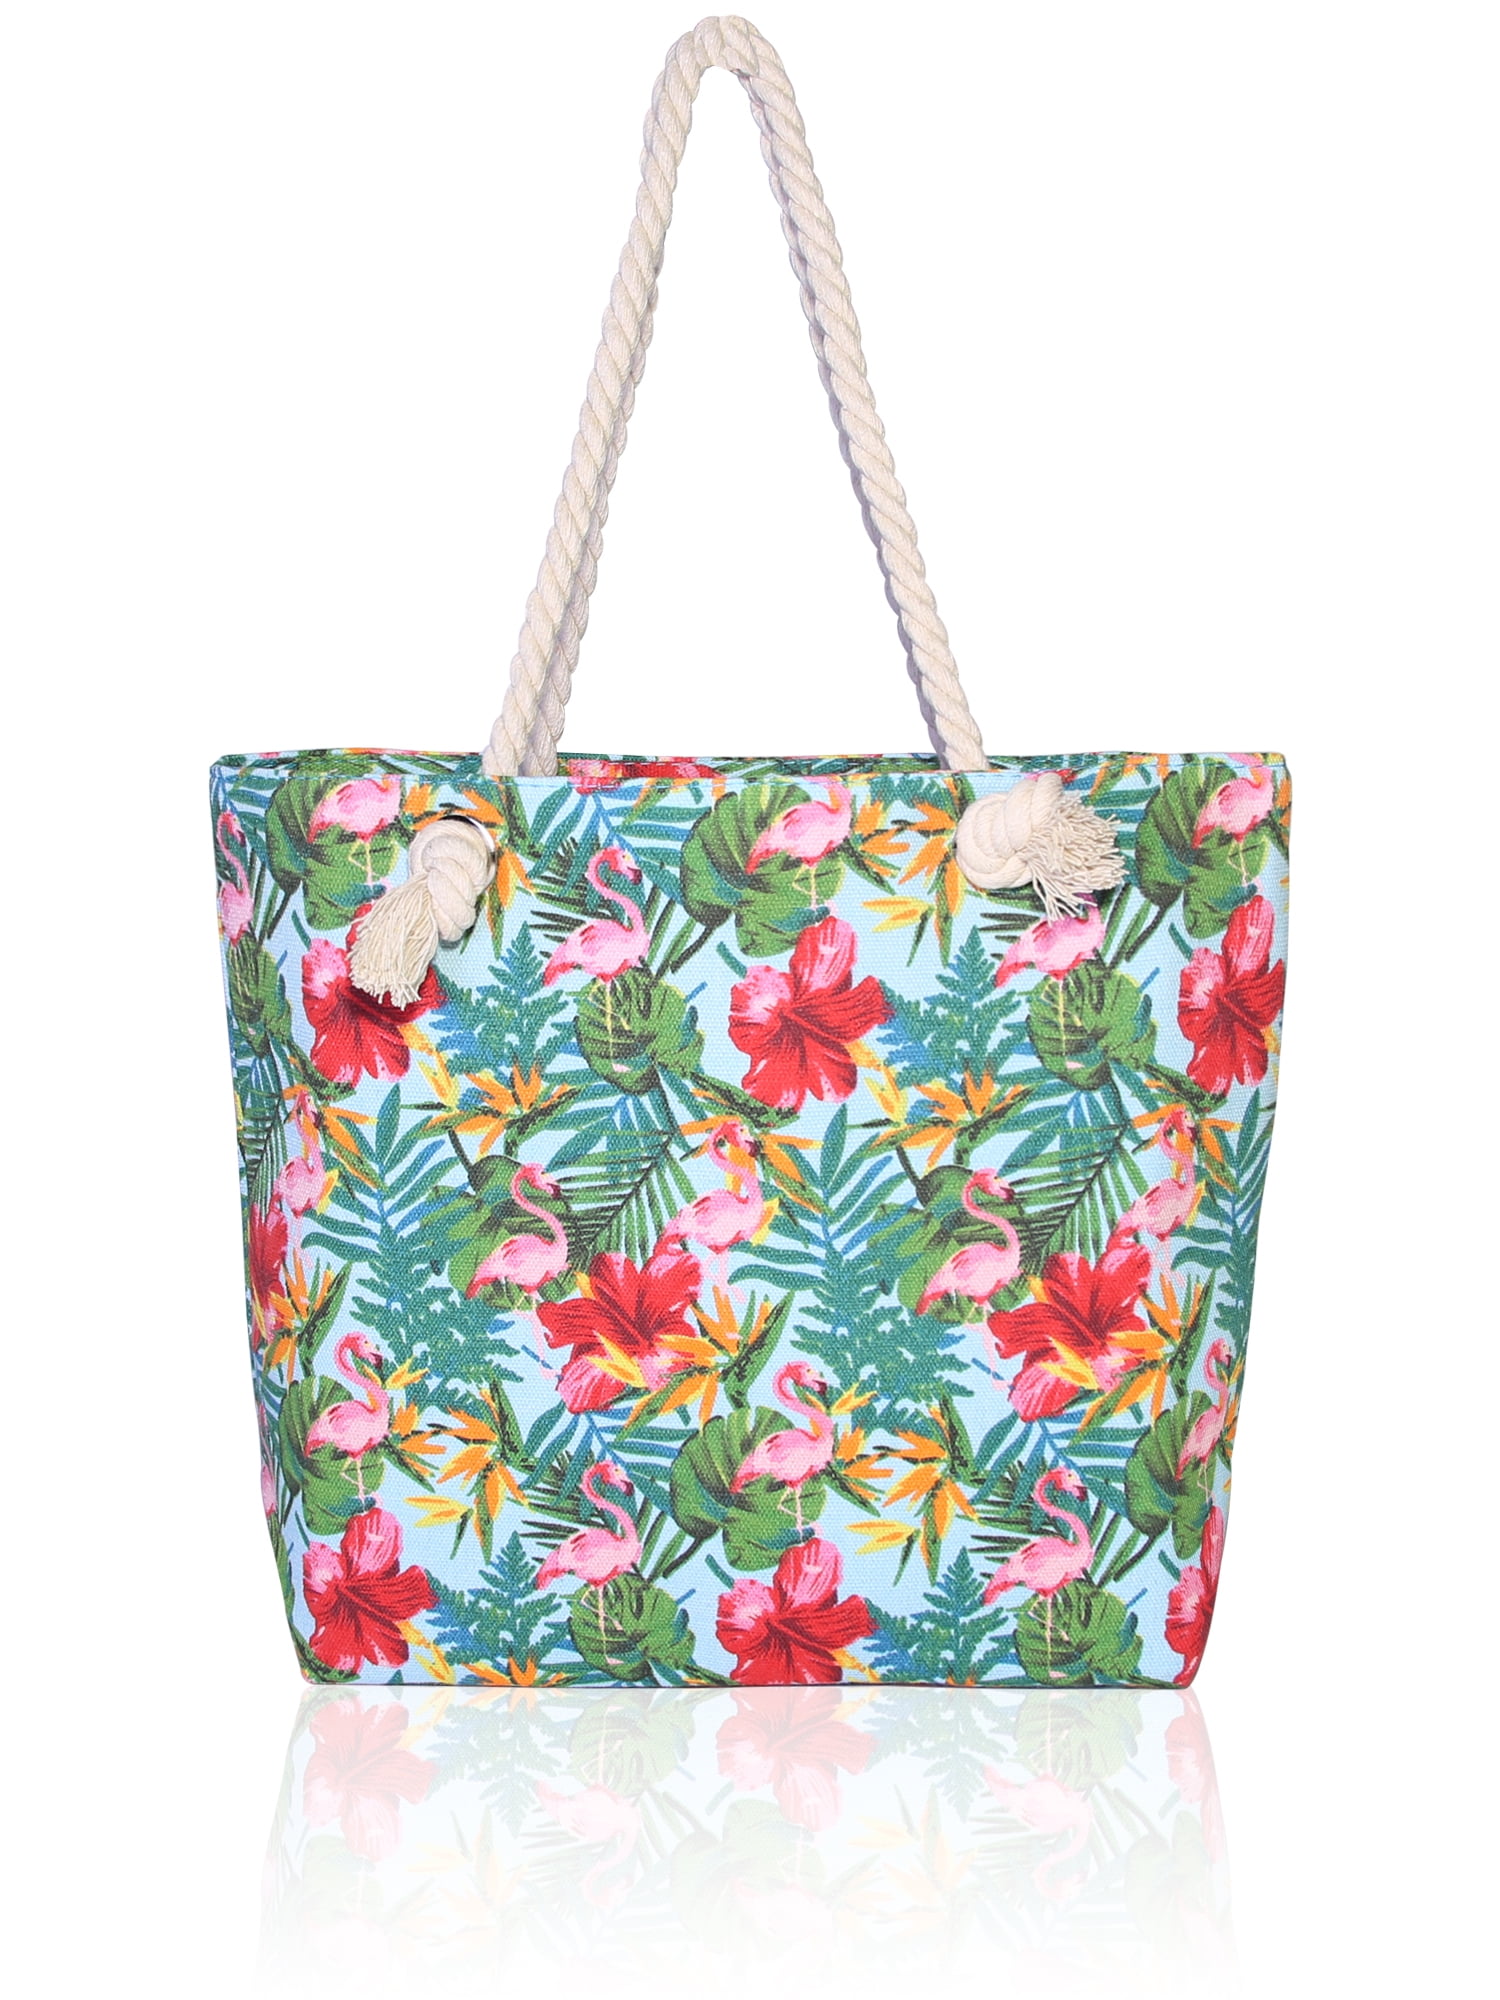 Basico - Basico Woman's Beach Tote Bag with Rope Handles Various ...